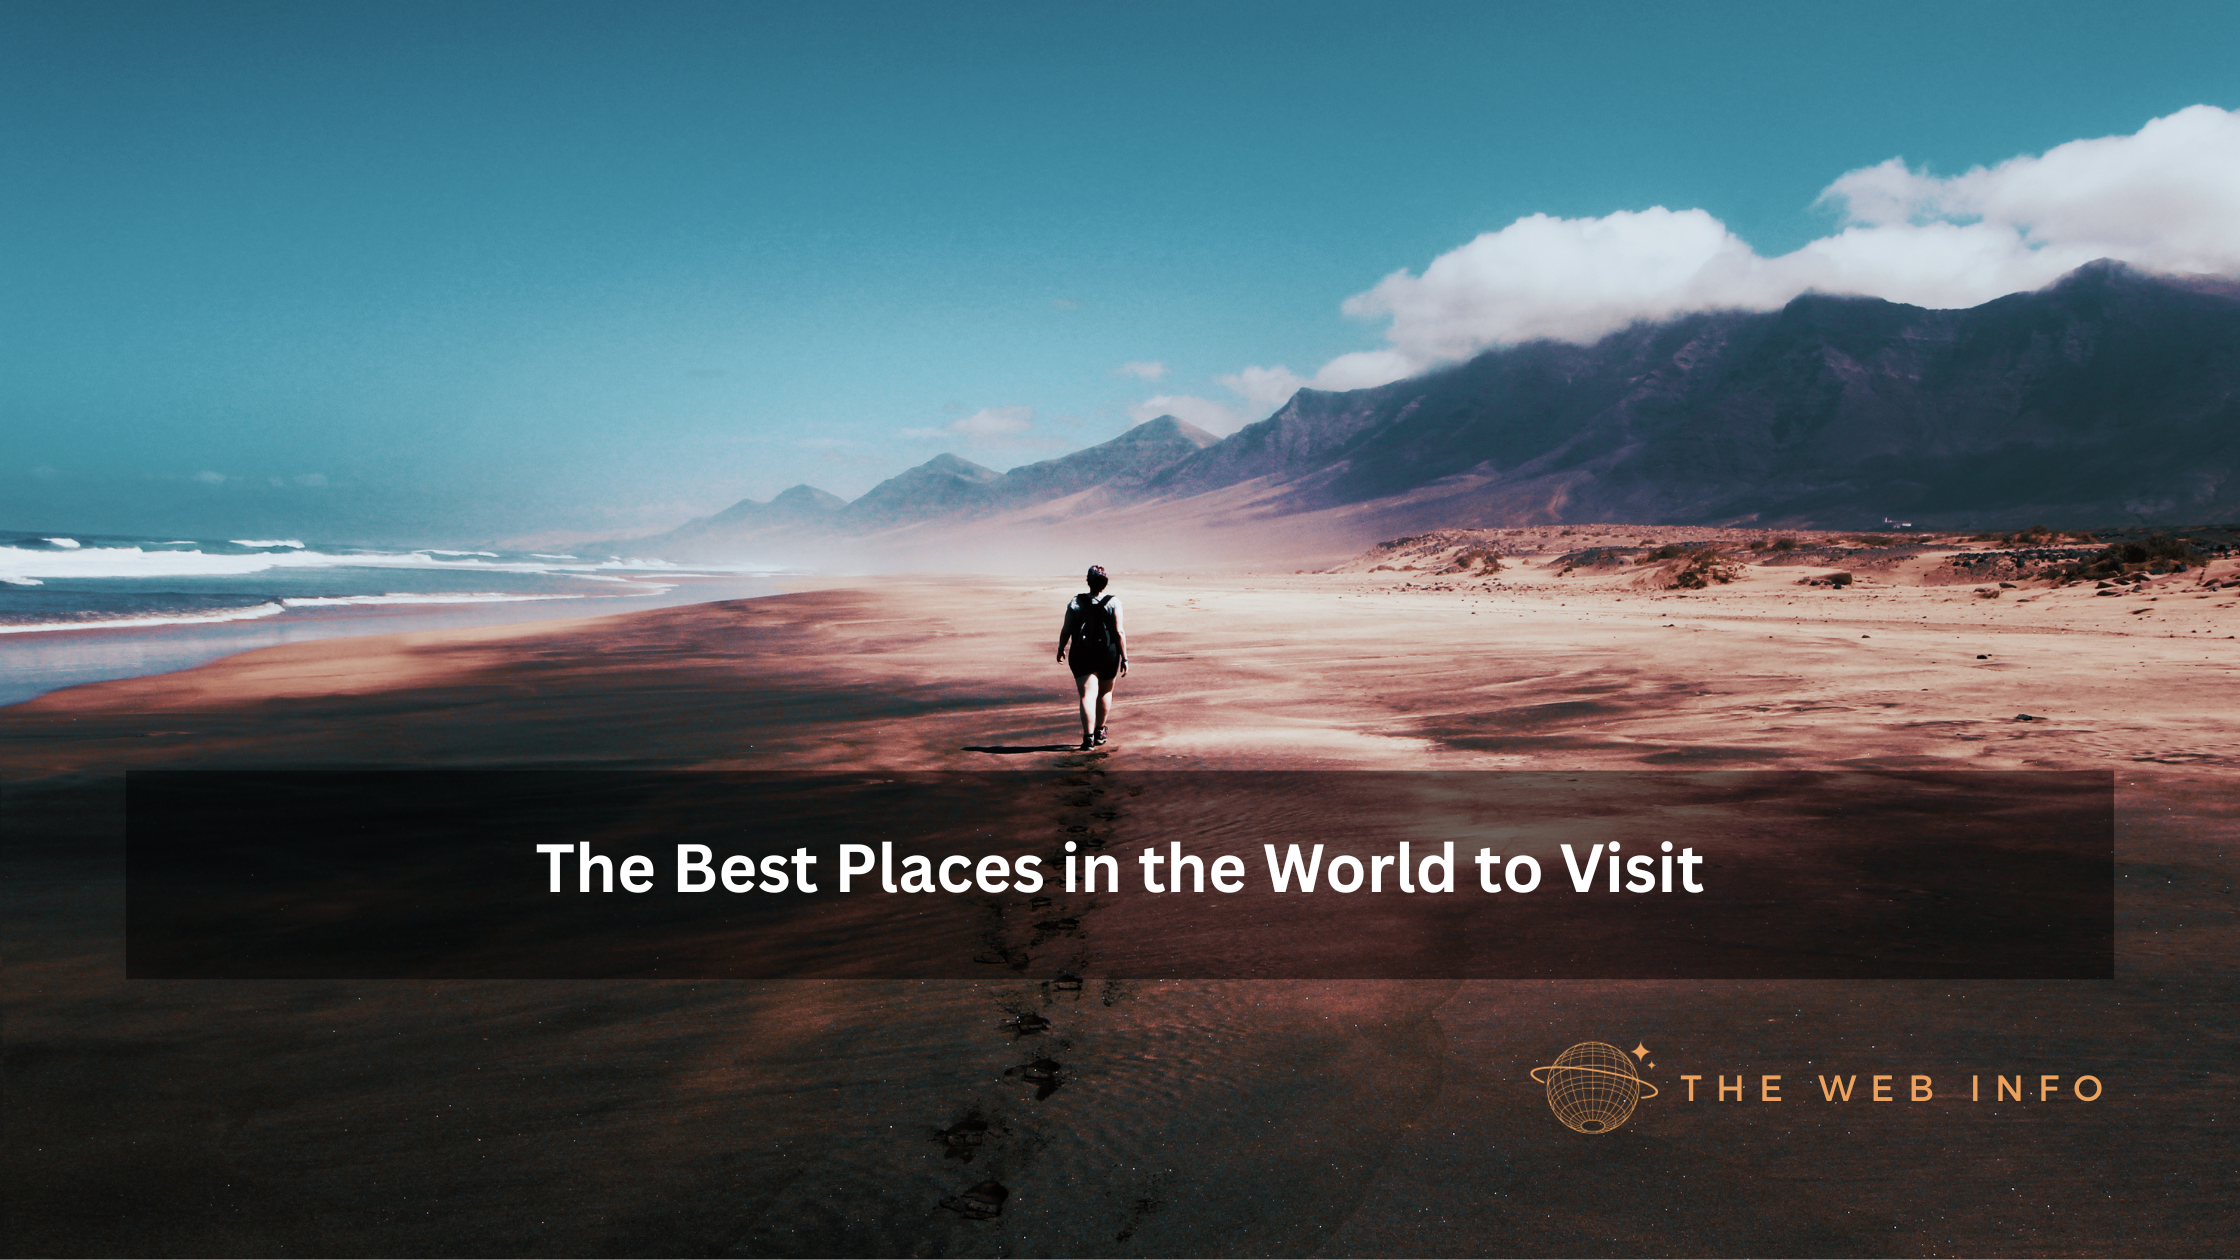 The Best Places in the World to Visit